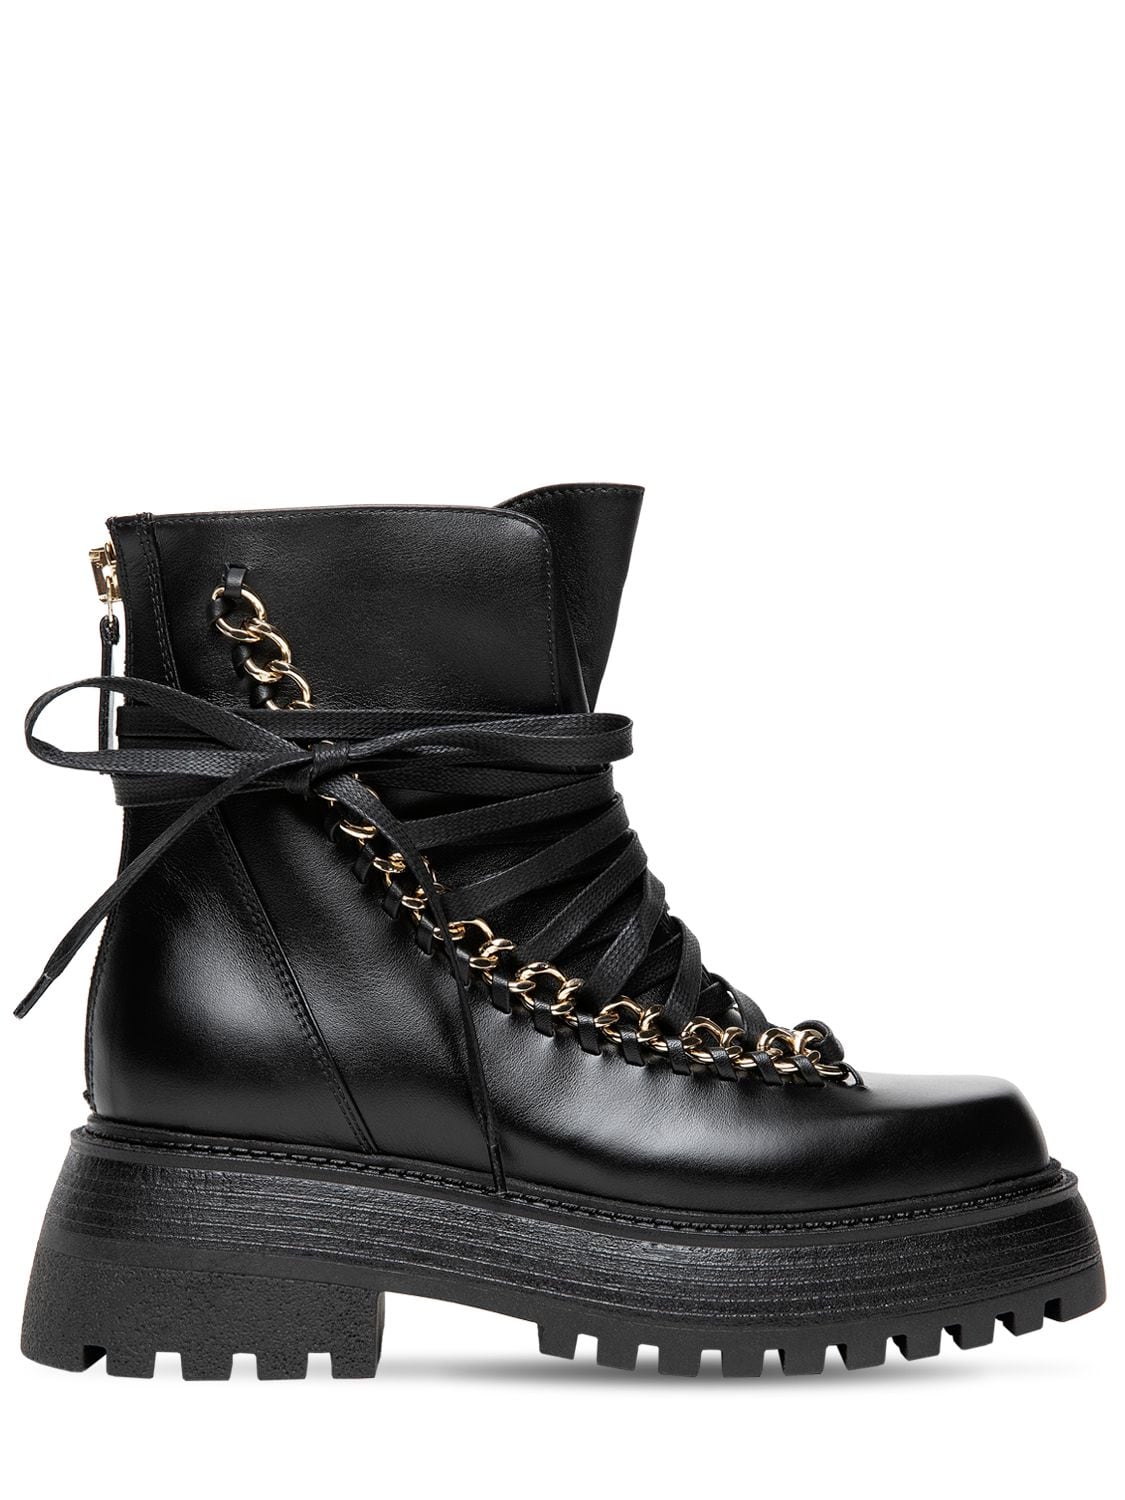 ALEVI 35mm Ines Leather Combat Boots for Women